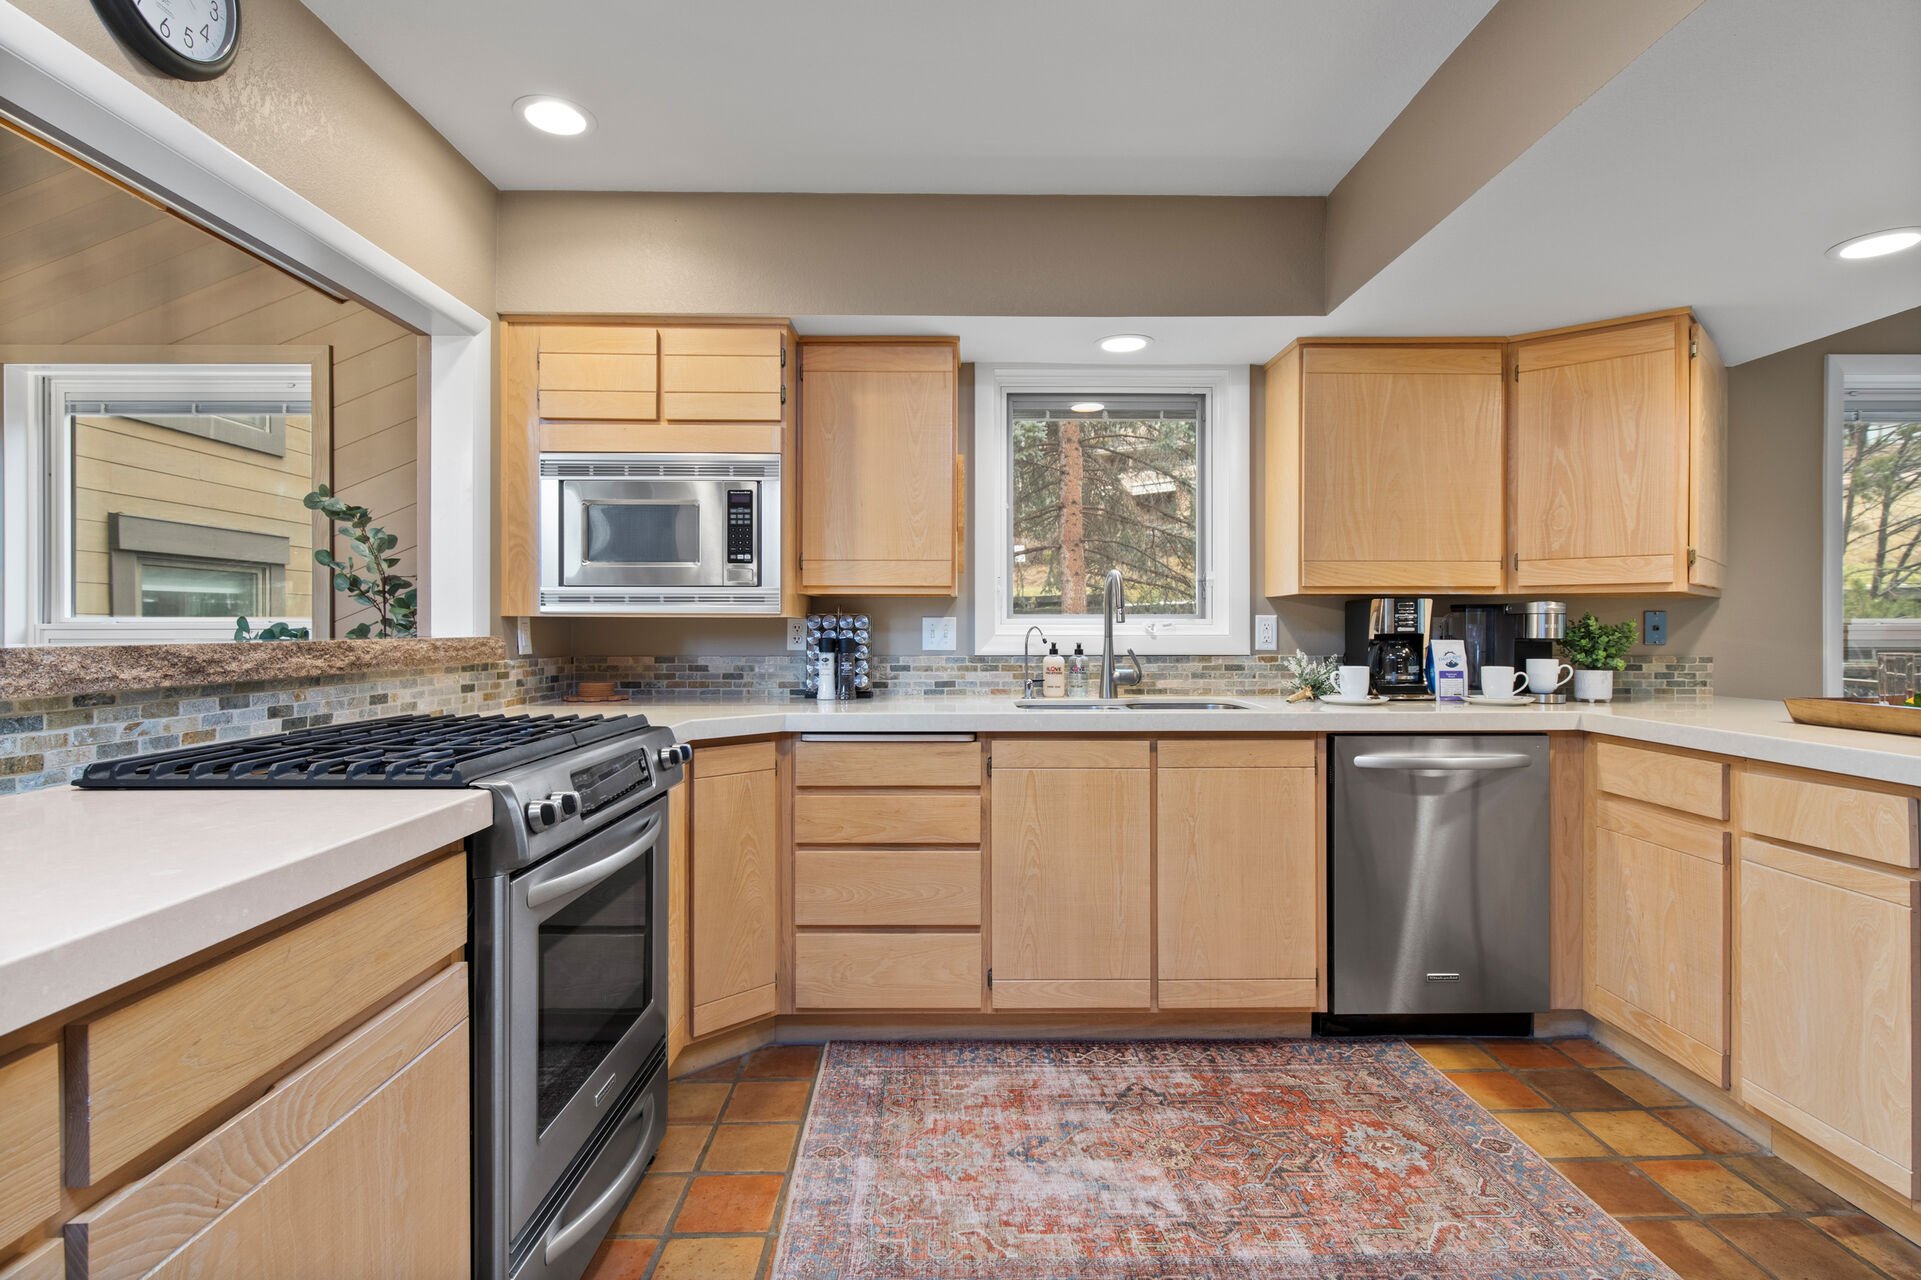 Fully equipped gourmet kitchen with stainless steel appliances,  stone countertops, separate breakfast nook/table area, bar seating for four, and access to the homes private back yard